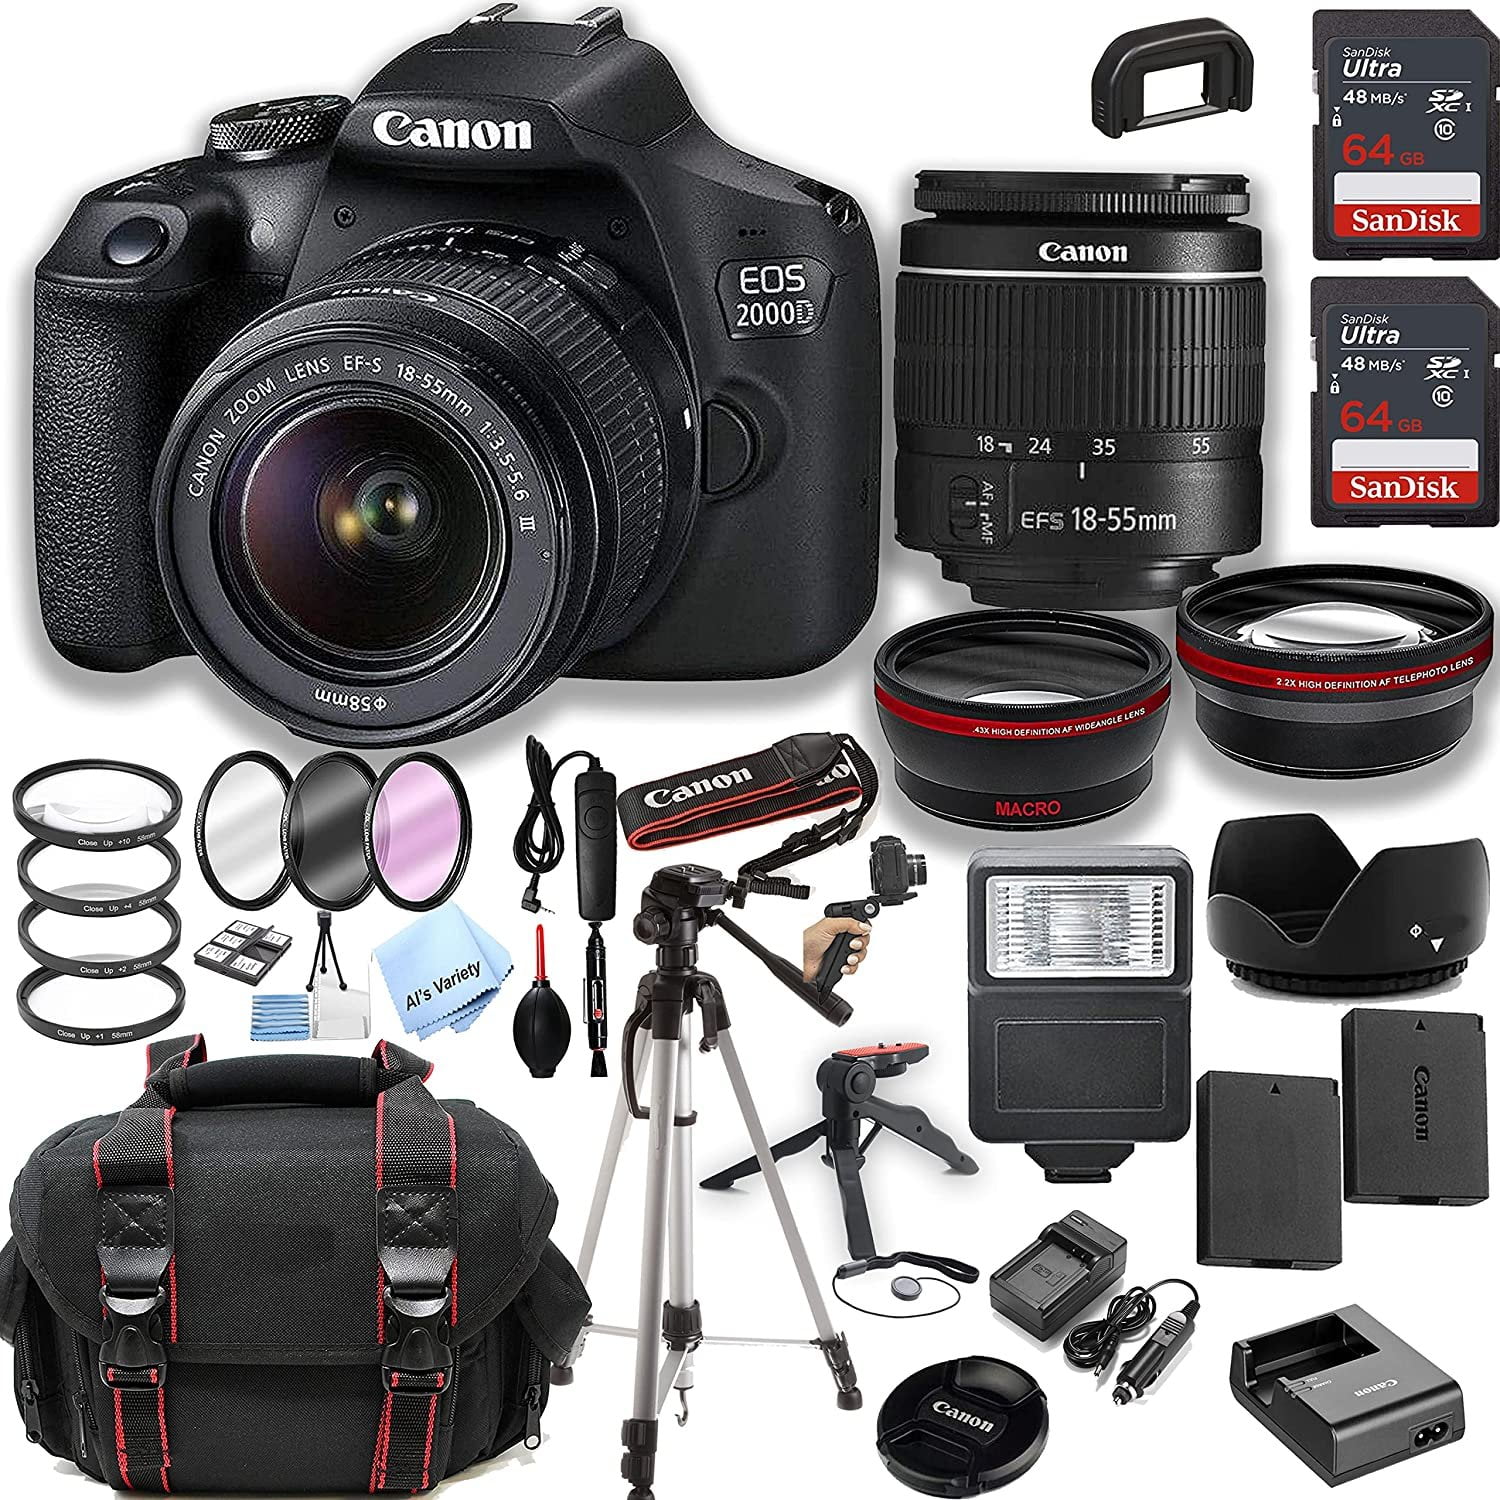  Canon EOS R7 Mirrorless Camera w/RF-S 18-150mm f/3.5-6.3 is  STM Lens + 2X 64GB Memory + Case + Filters + TTL Flash + More (35pc Bundle)  : Electronics